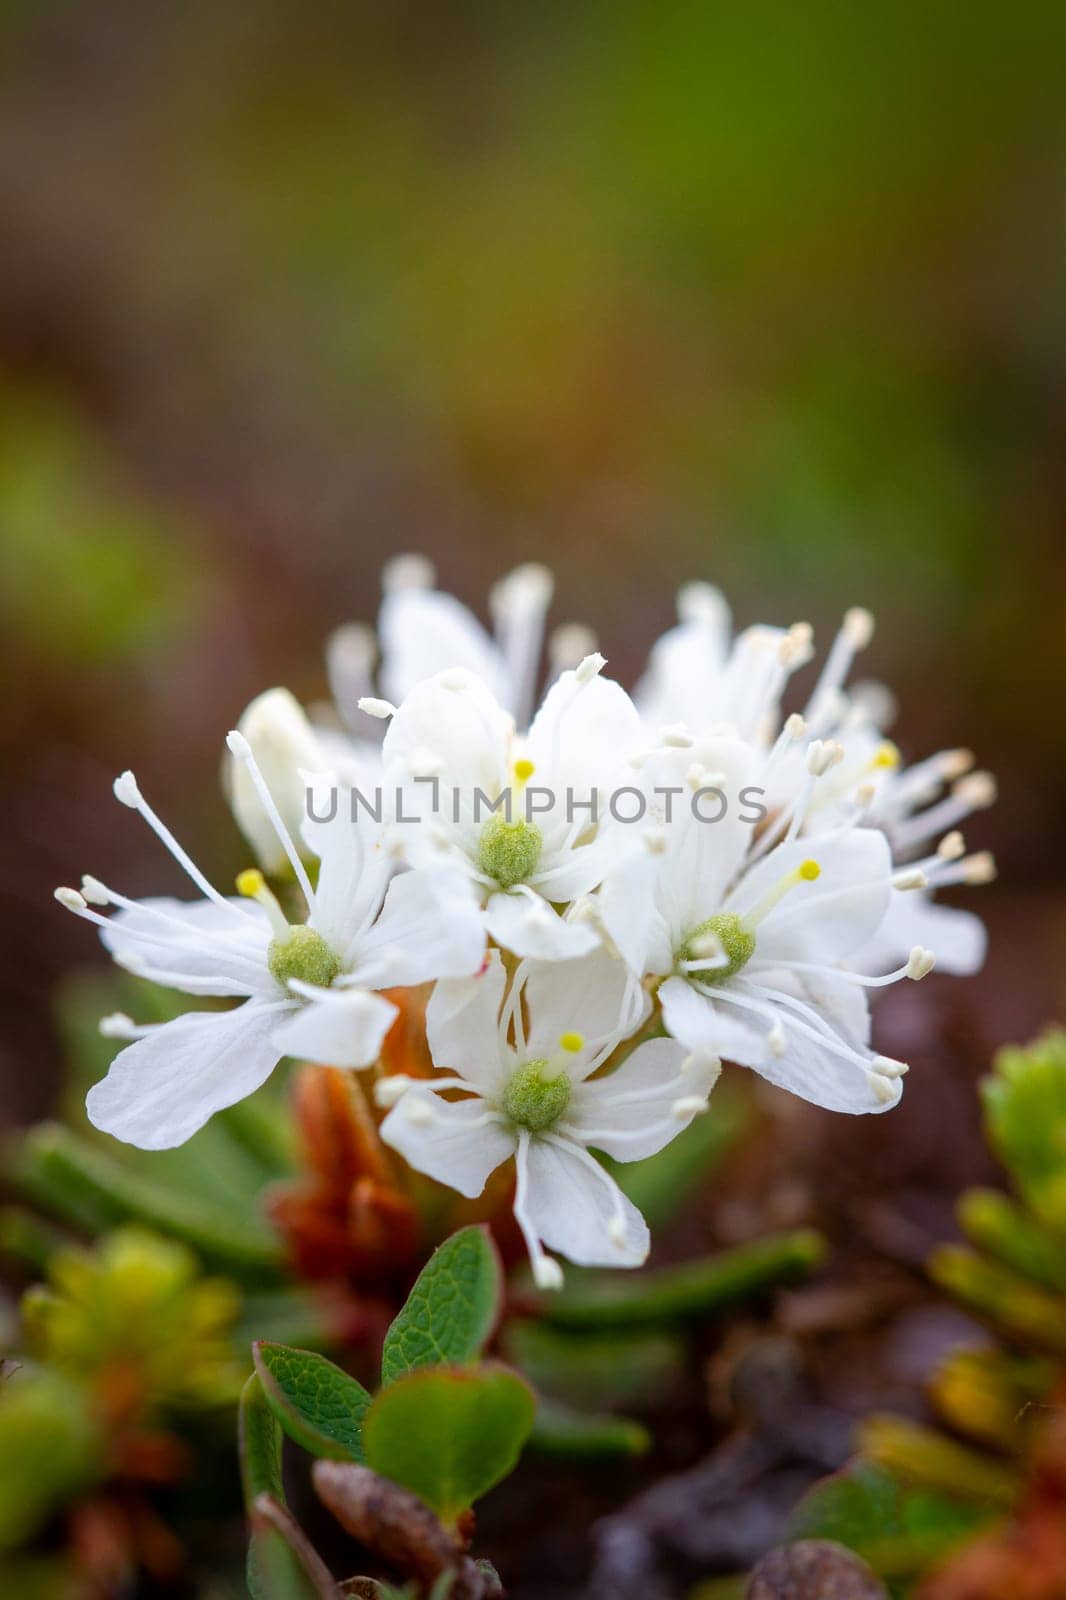 Close-up of Labrador tea flower found in Canada's arctic tundra by Granchinho